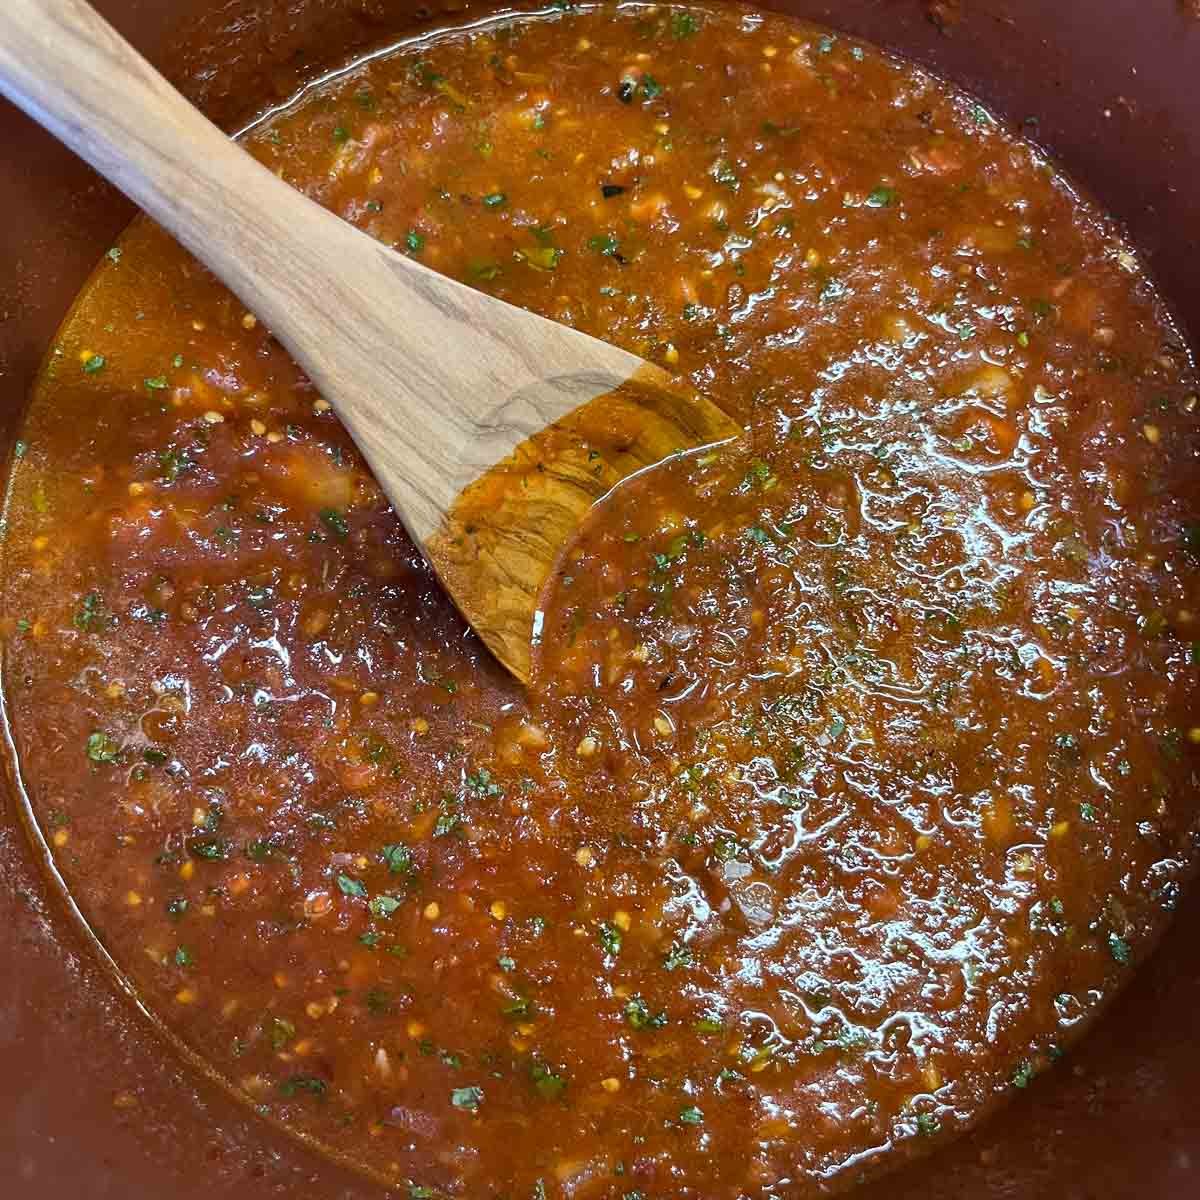 salsa being stirred with a wooden spoon